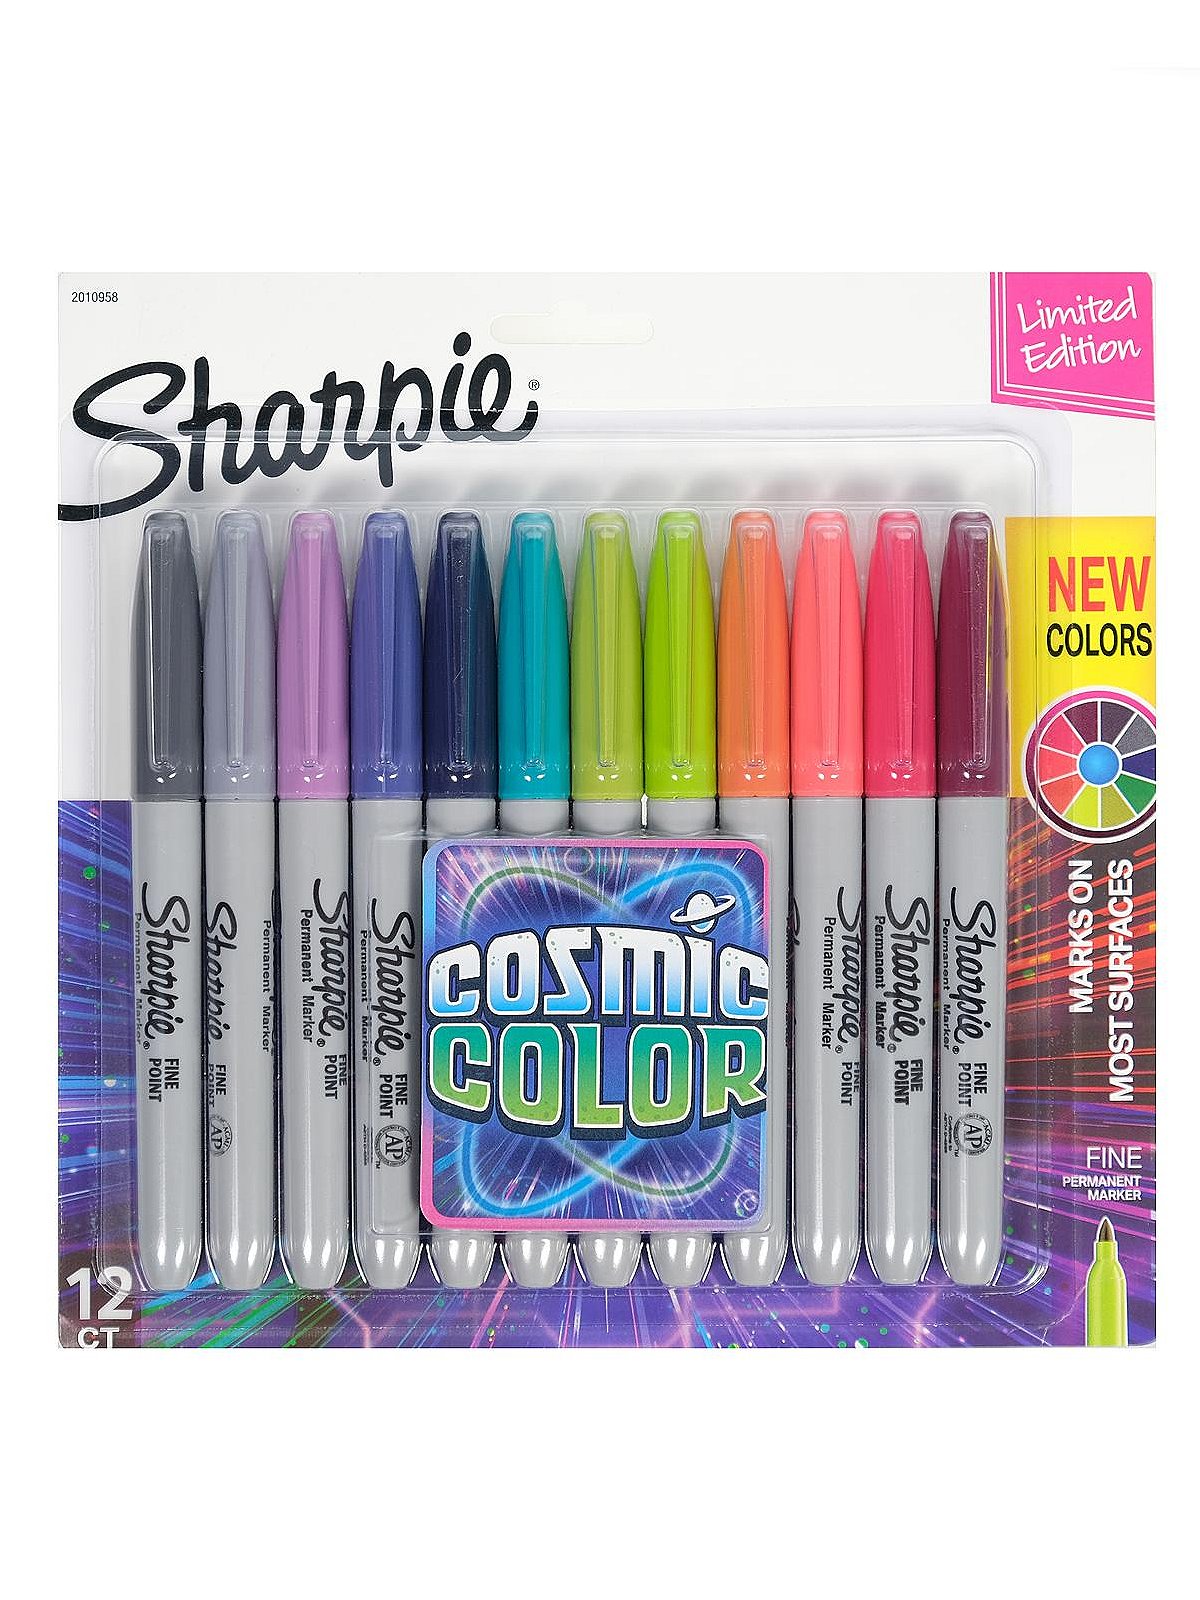 Sharpie Fine Poing Permanent Markers -Black - 5 Pack - Memorial